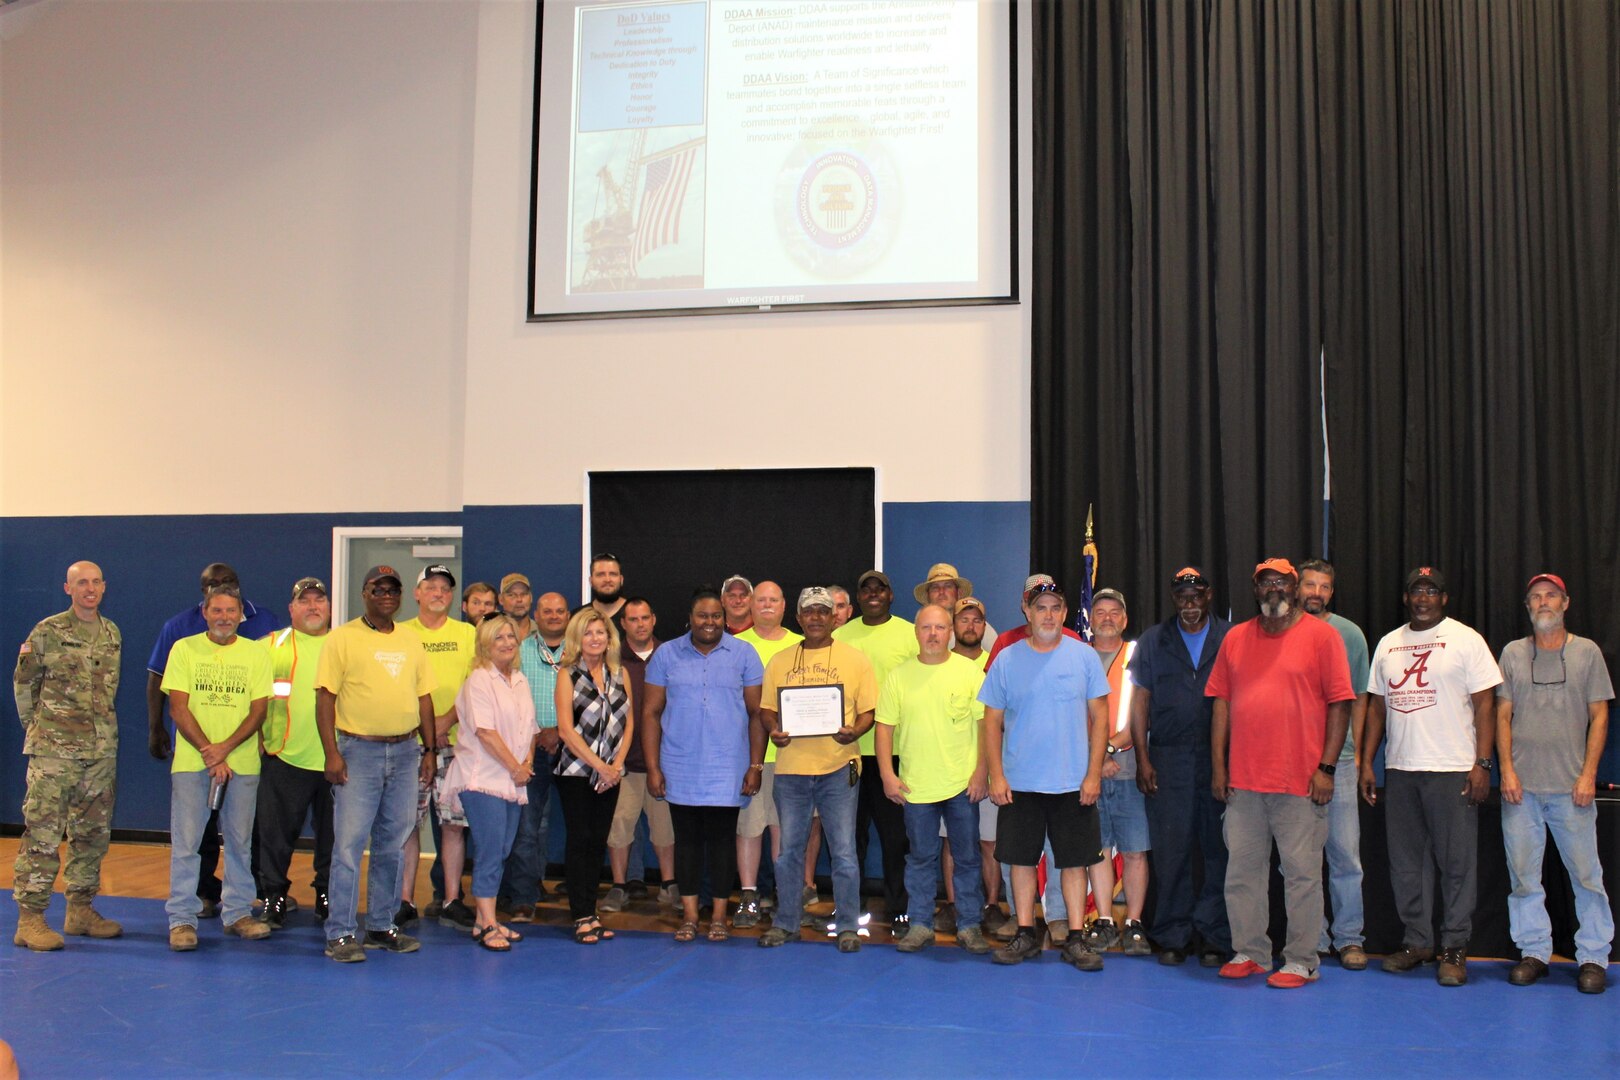 DLA Distribution Anniston Vehicles and Artillery division is awarded the DLA Distribution Large Team of the Year award